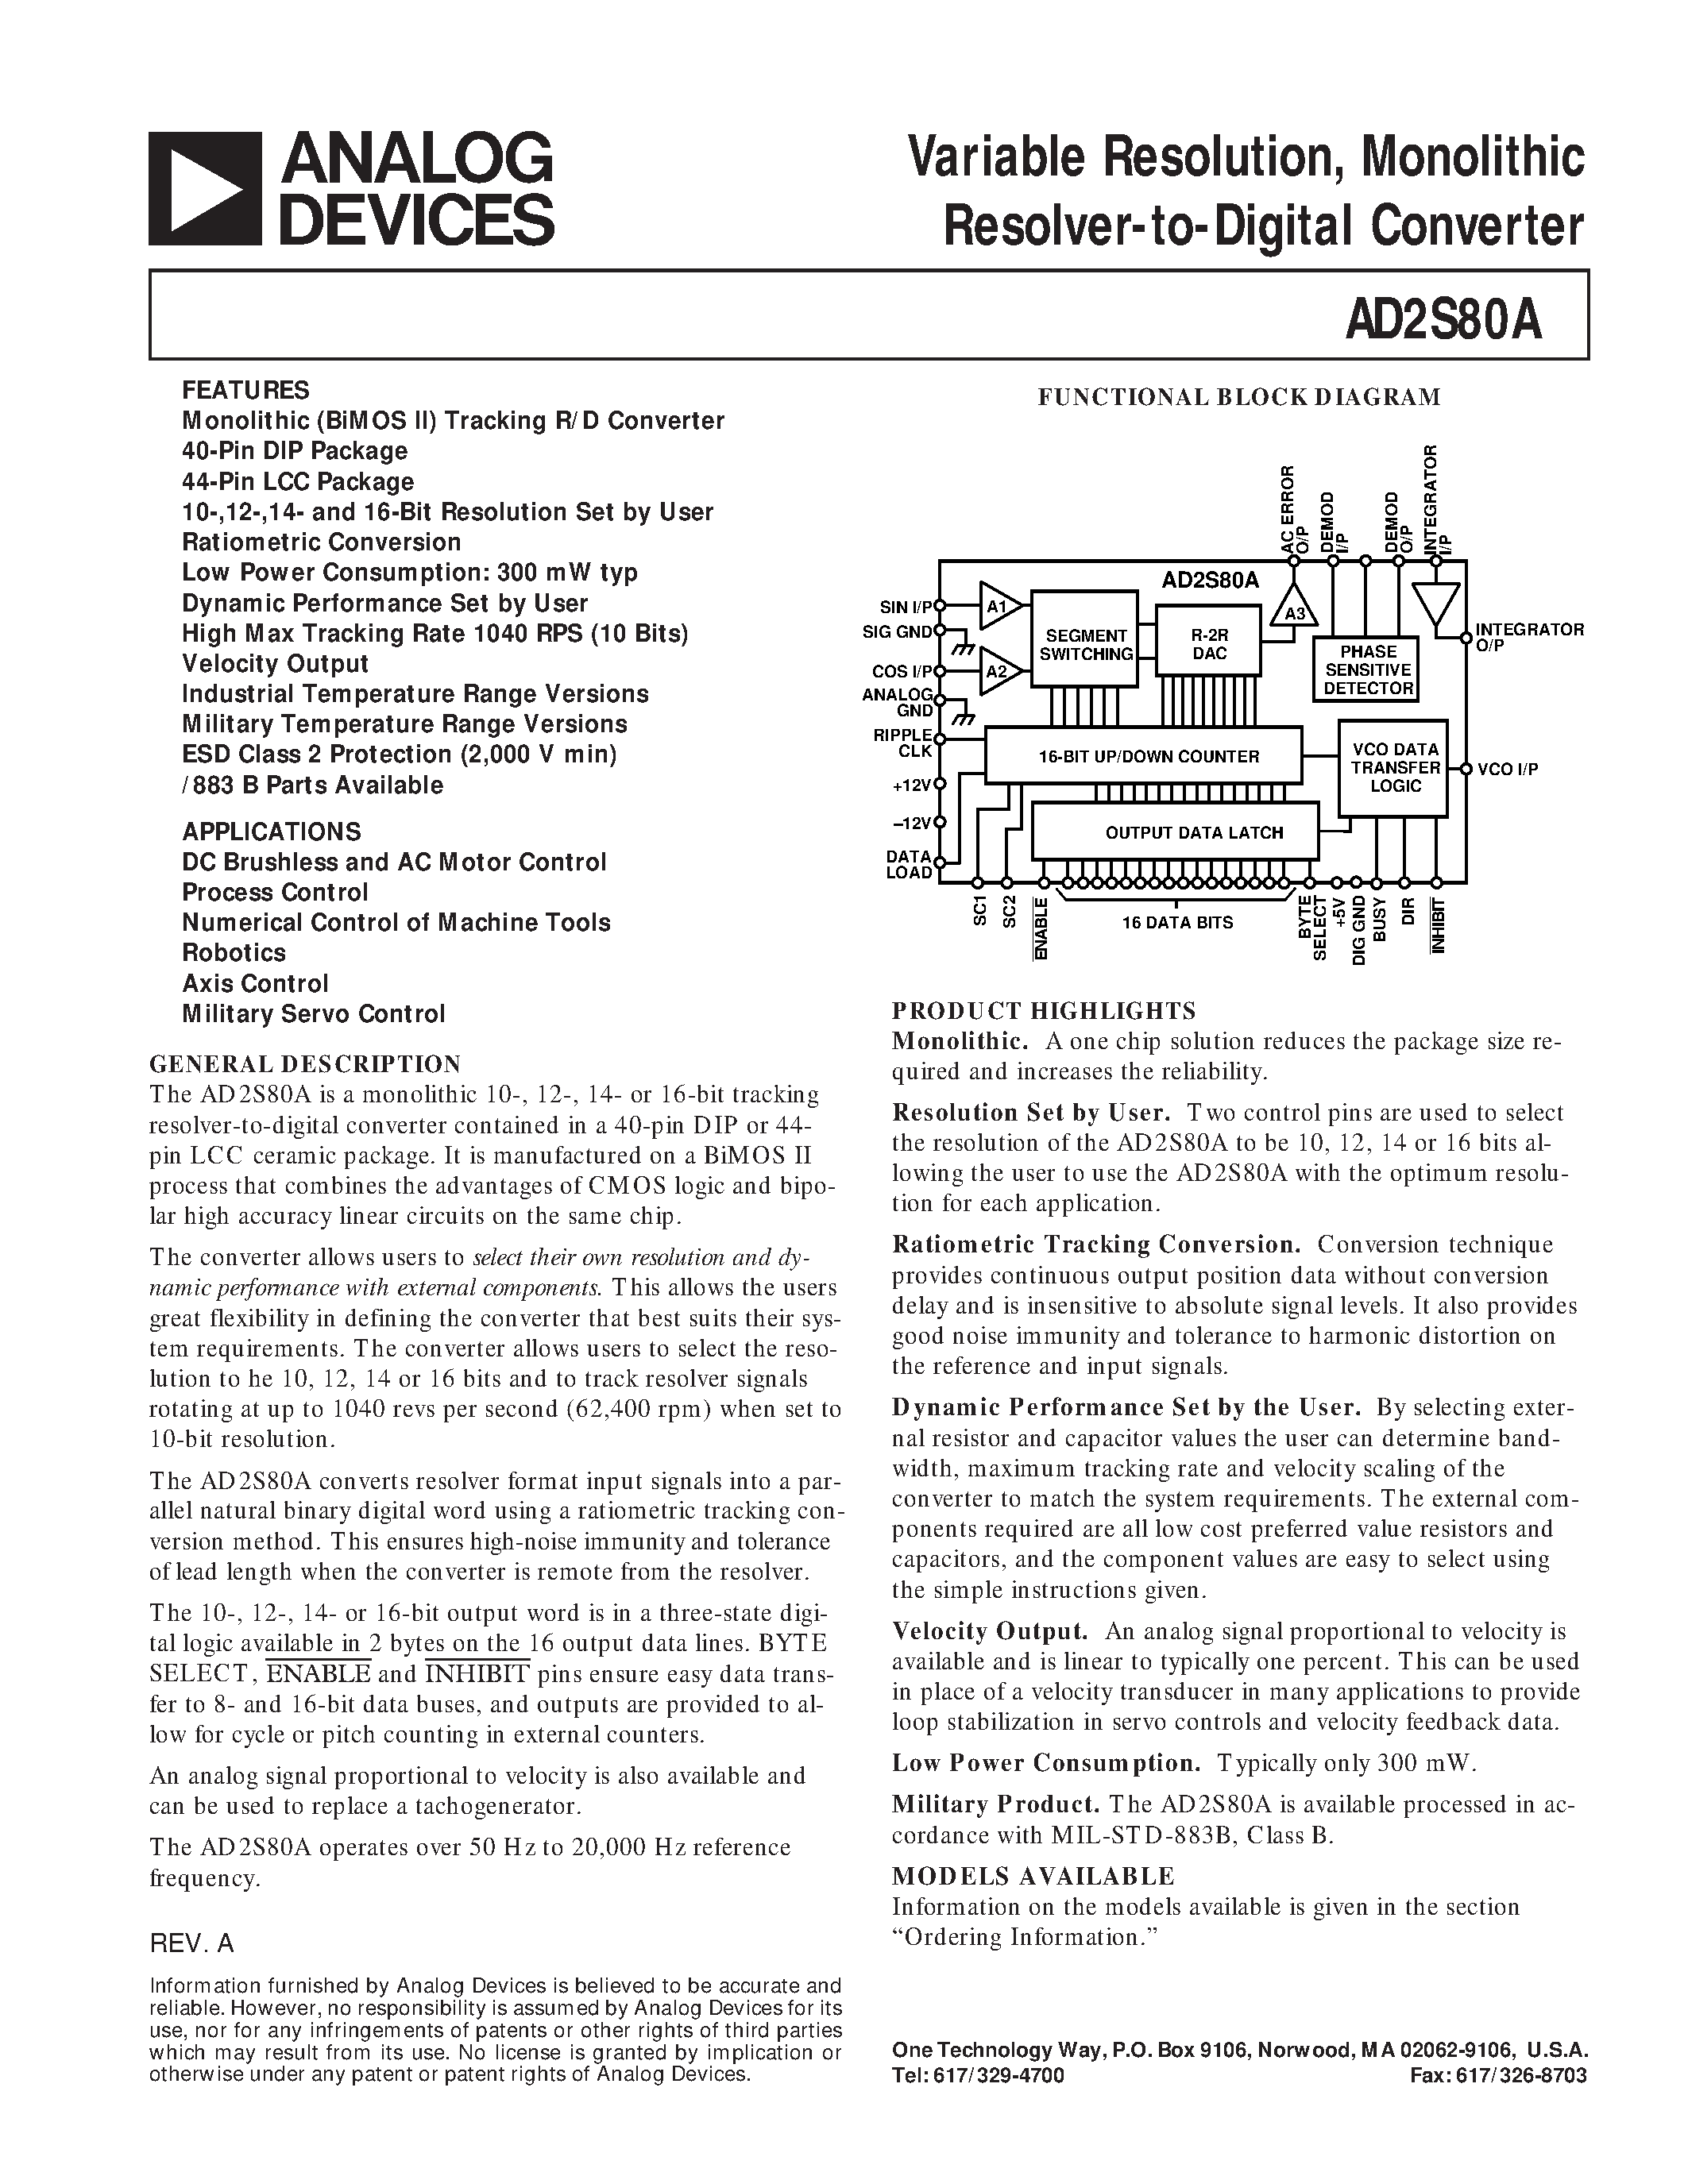 Datasheet AD2S80ABD - Variable Resolution/ Monolithic Resolver-to-Digital Converter page 1